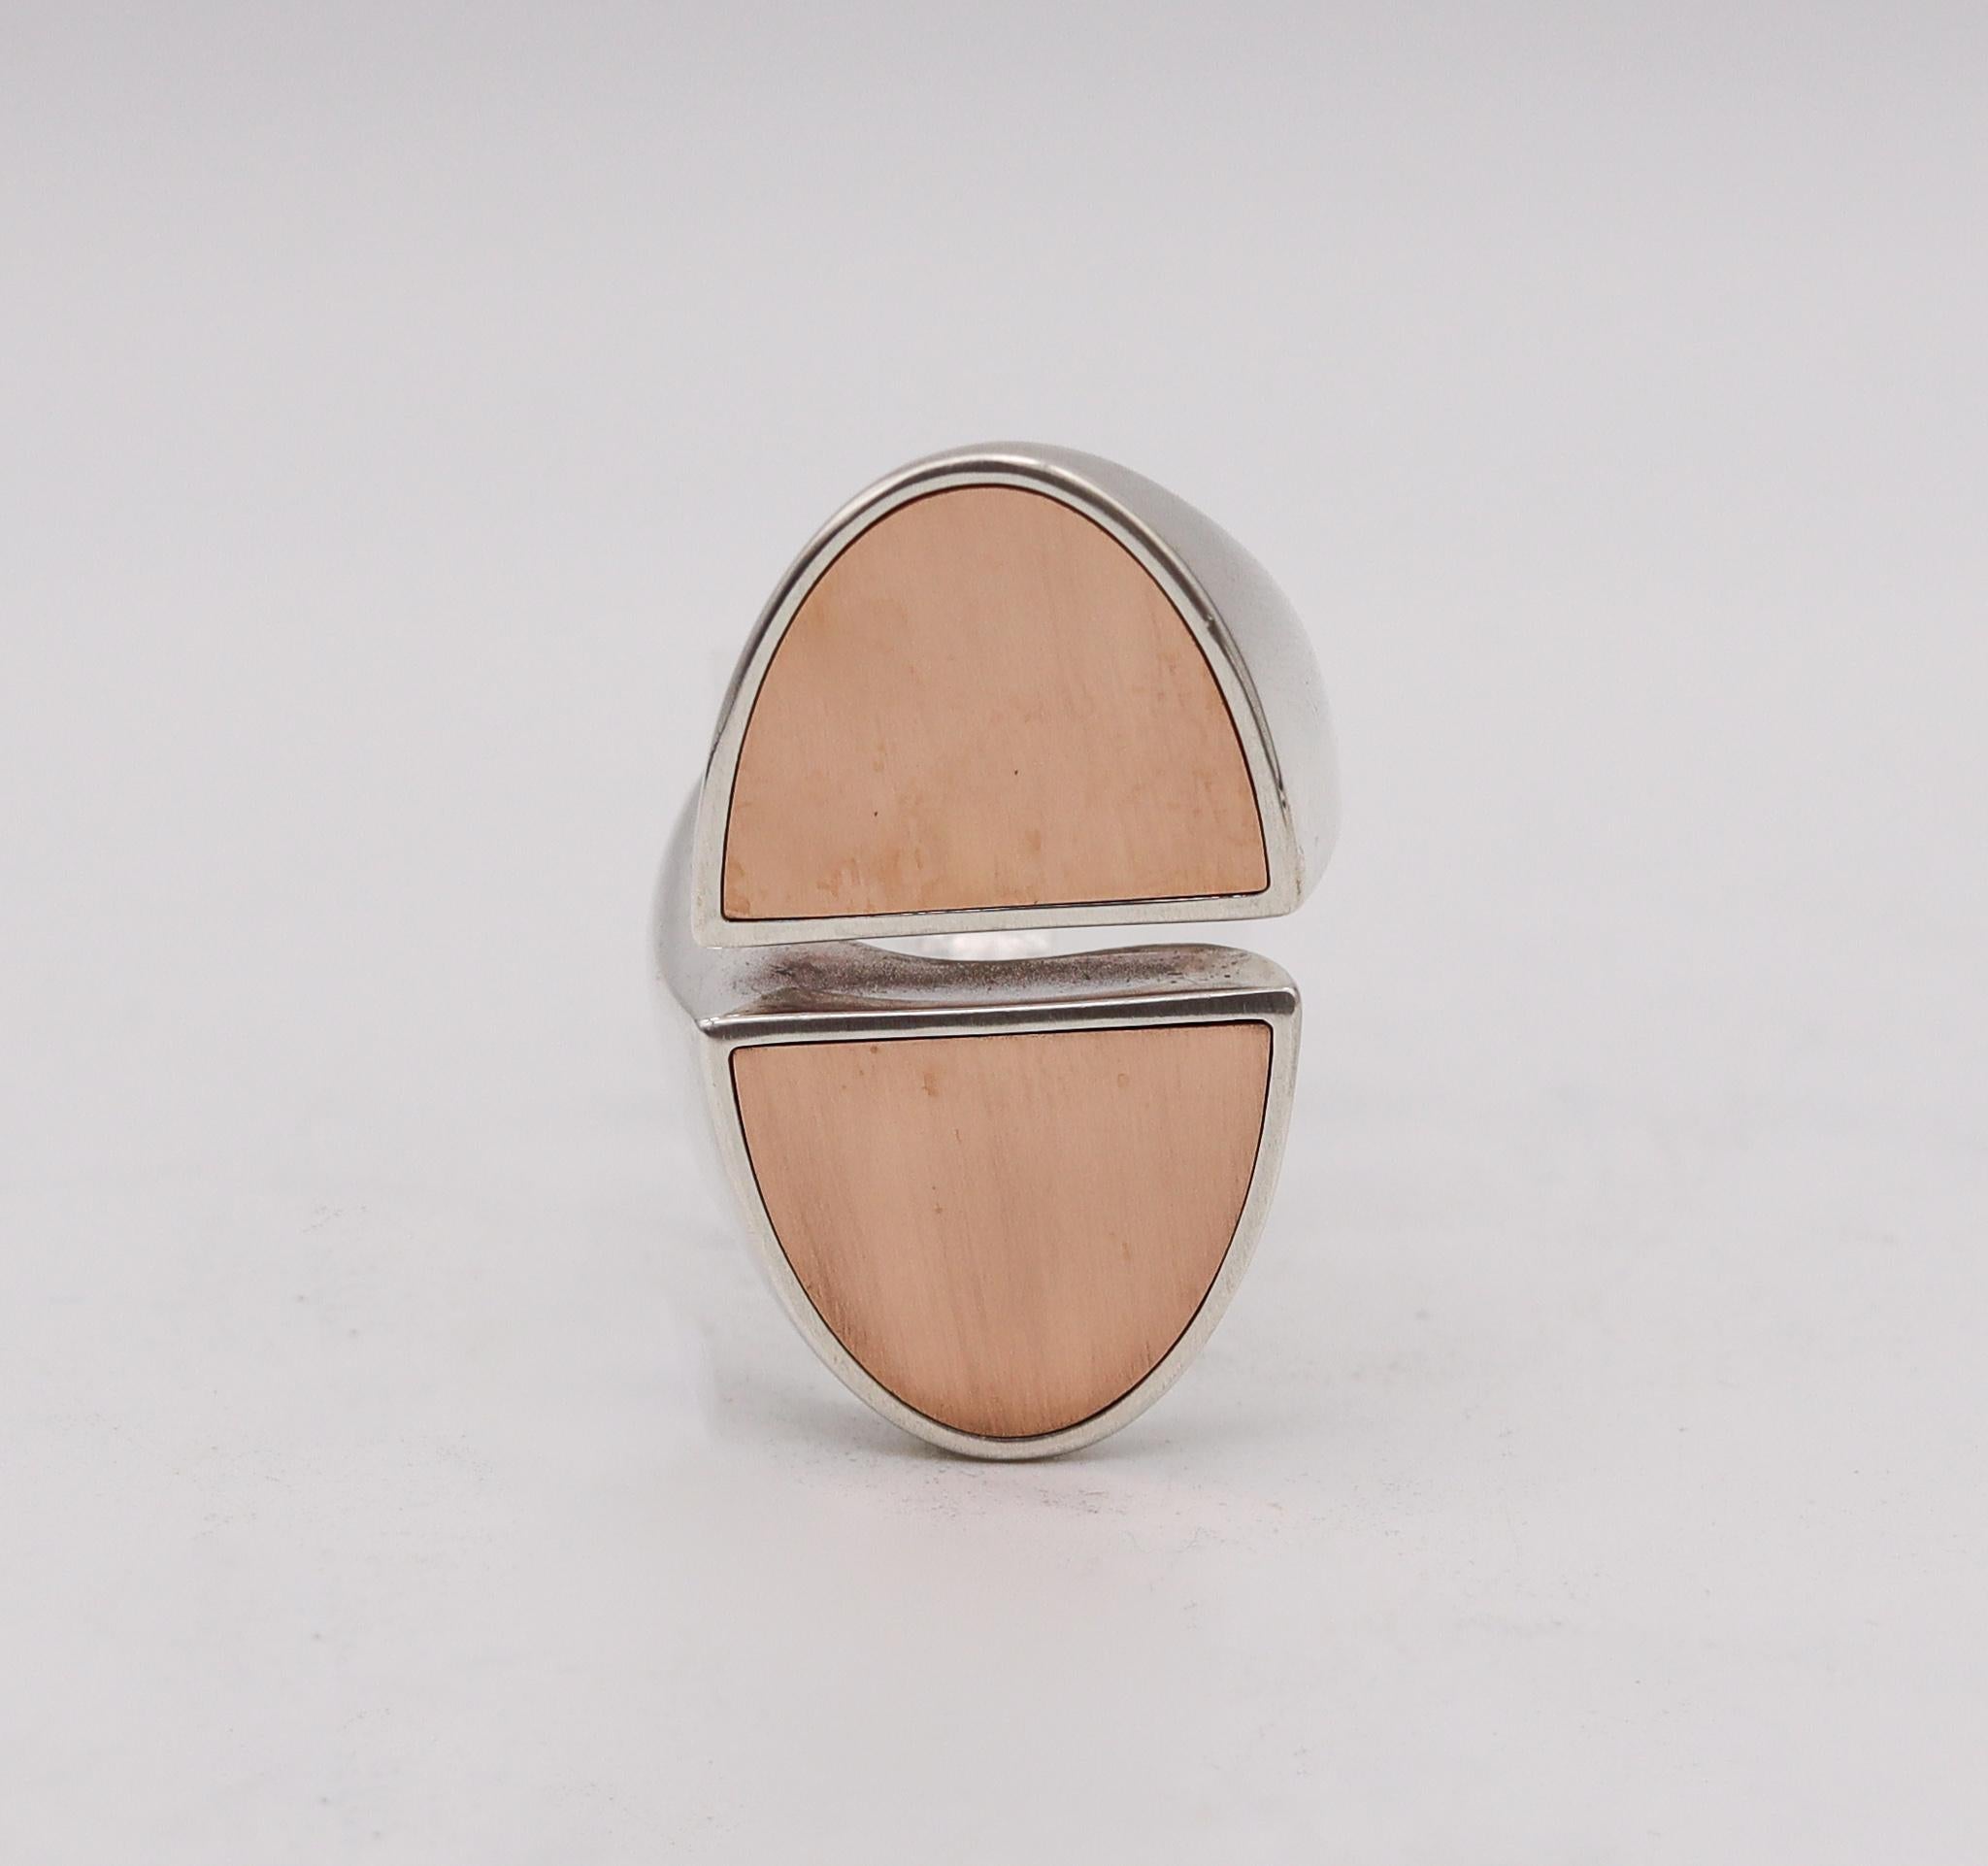 Hermes Paris Geometric H Logo Cocktail Ring in 18Kt Yellow Gold and Sterling In Excellent Condition For Sale In Miami, FL